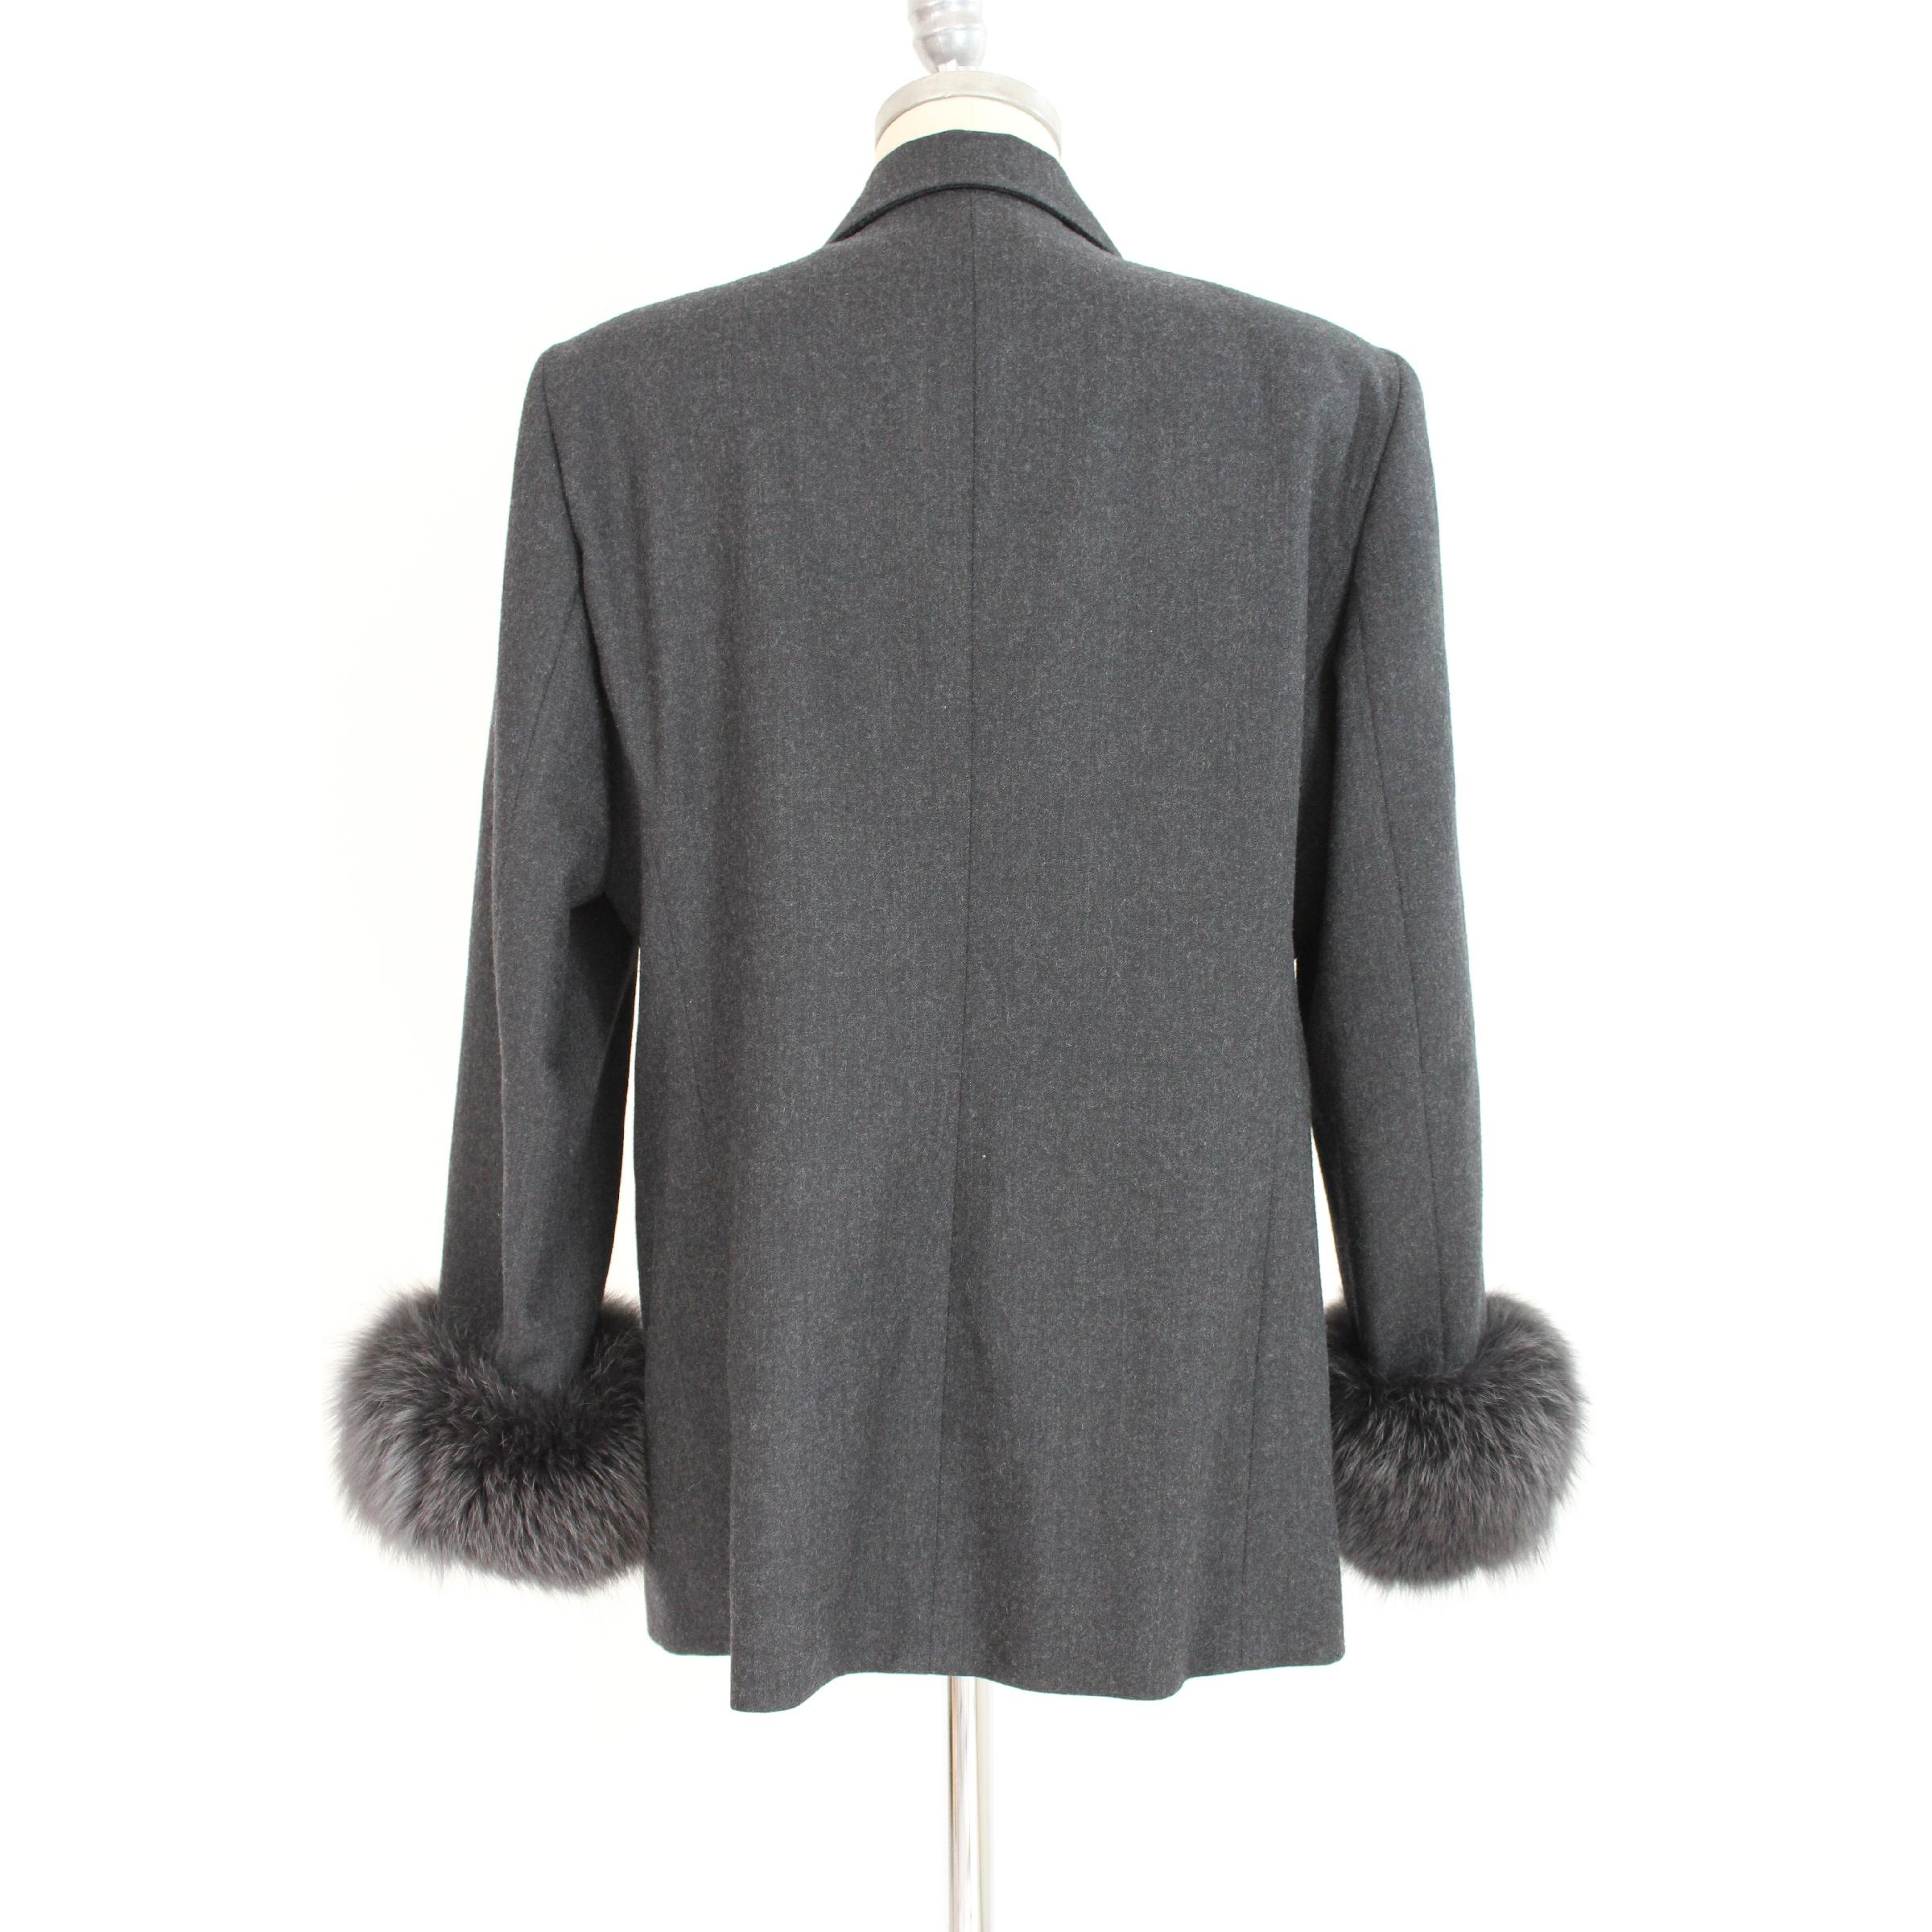 Gianfranco Ferre Forma women's vintage jacket. Gray color, 100% virgin wool. Wrists with fur. Oversize size. 90s. Made in Italy. Excellent vintage conditions.

Size: 48 It 14 Us 16 Uk

Shoulder: 48 cm
Bust / Chest: 57 cm
Sleeve: 60 cm
Length: 78 cm